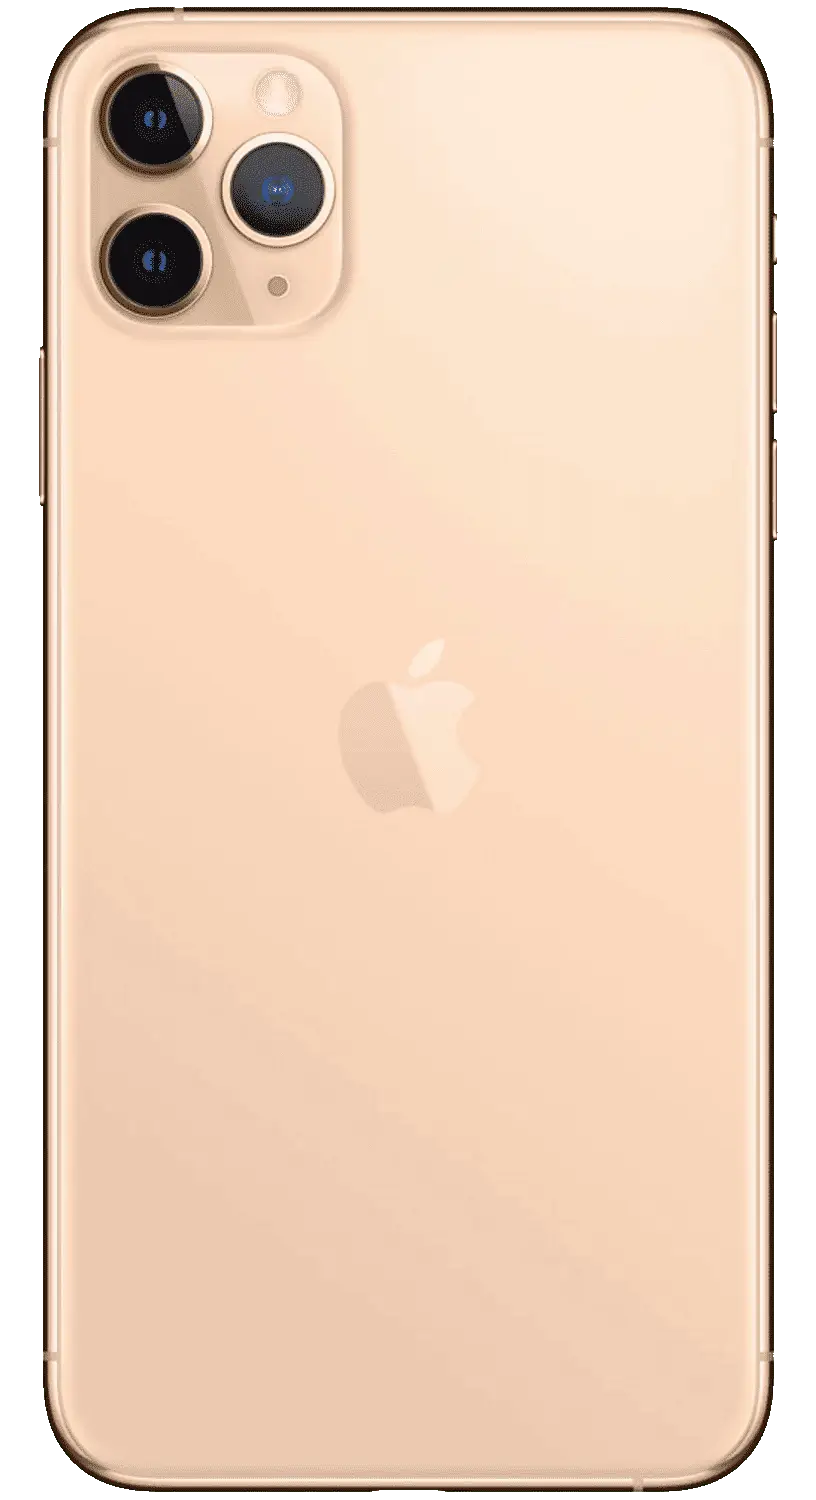 iphone 11m front